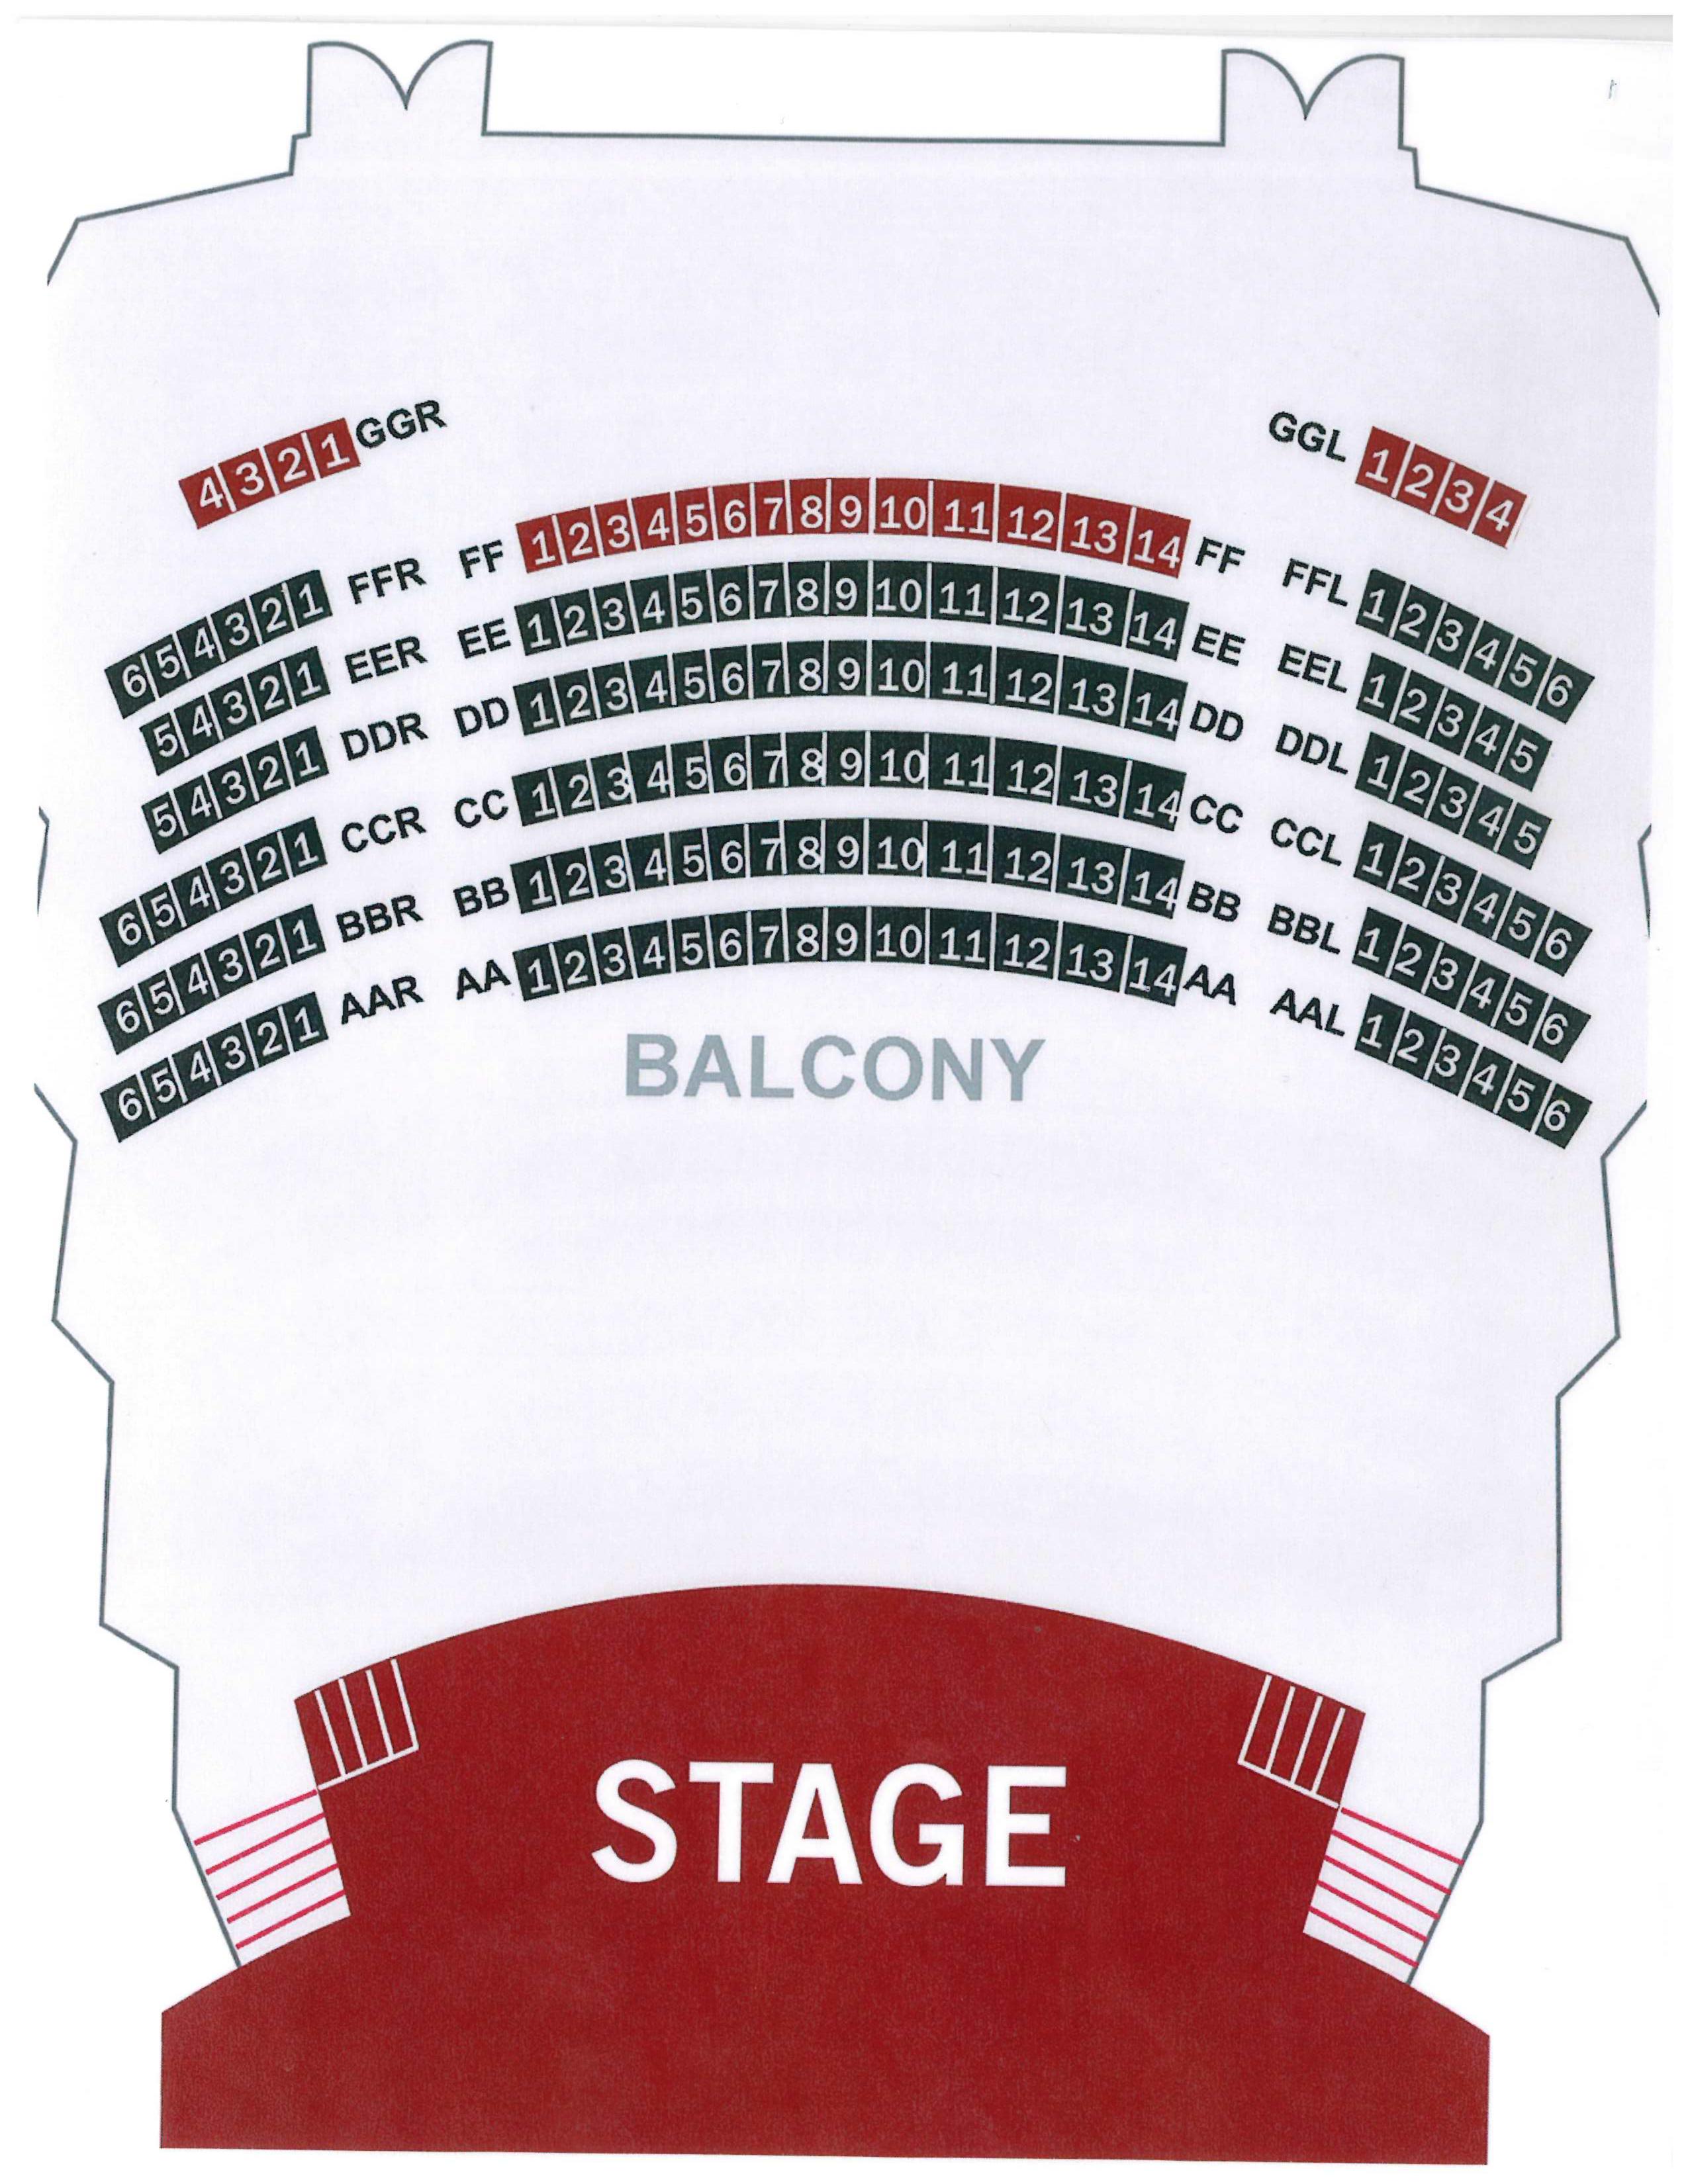 Speakeasy Stage Seating Chart